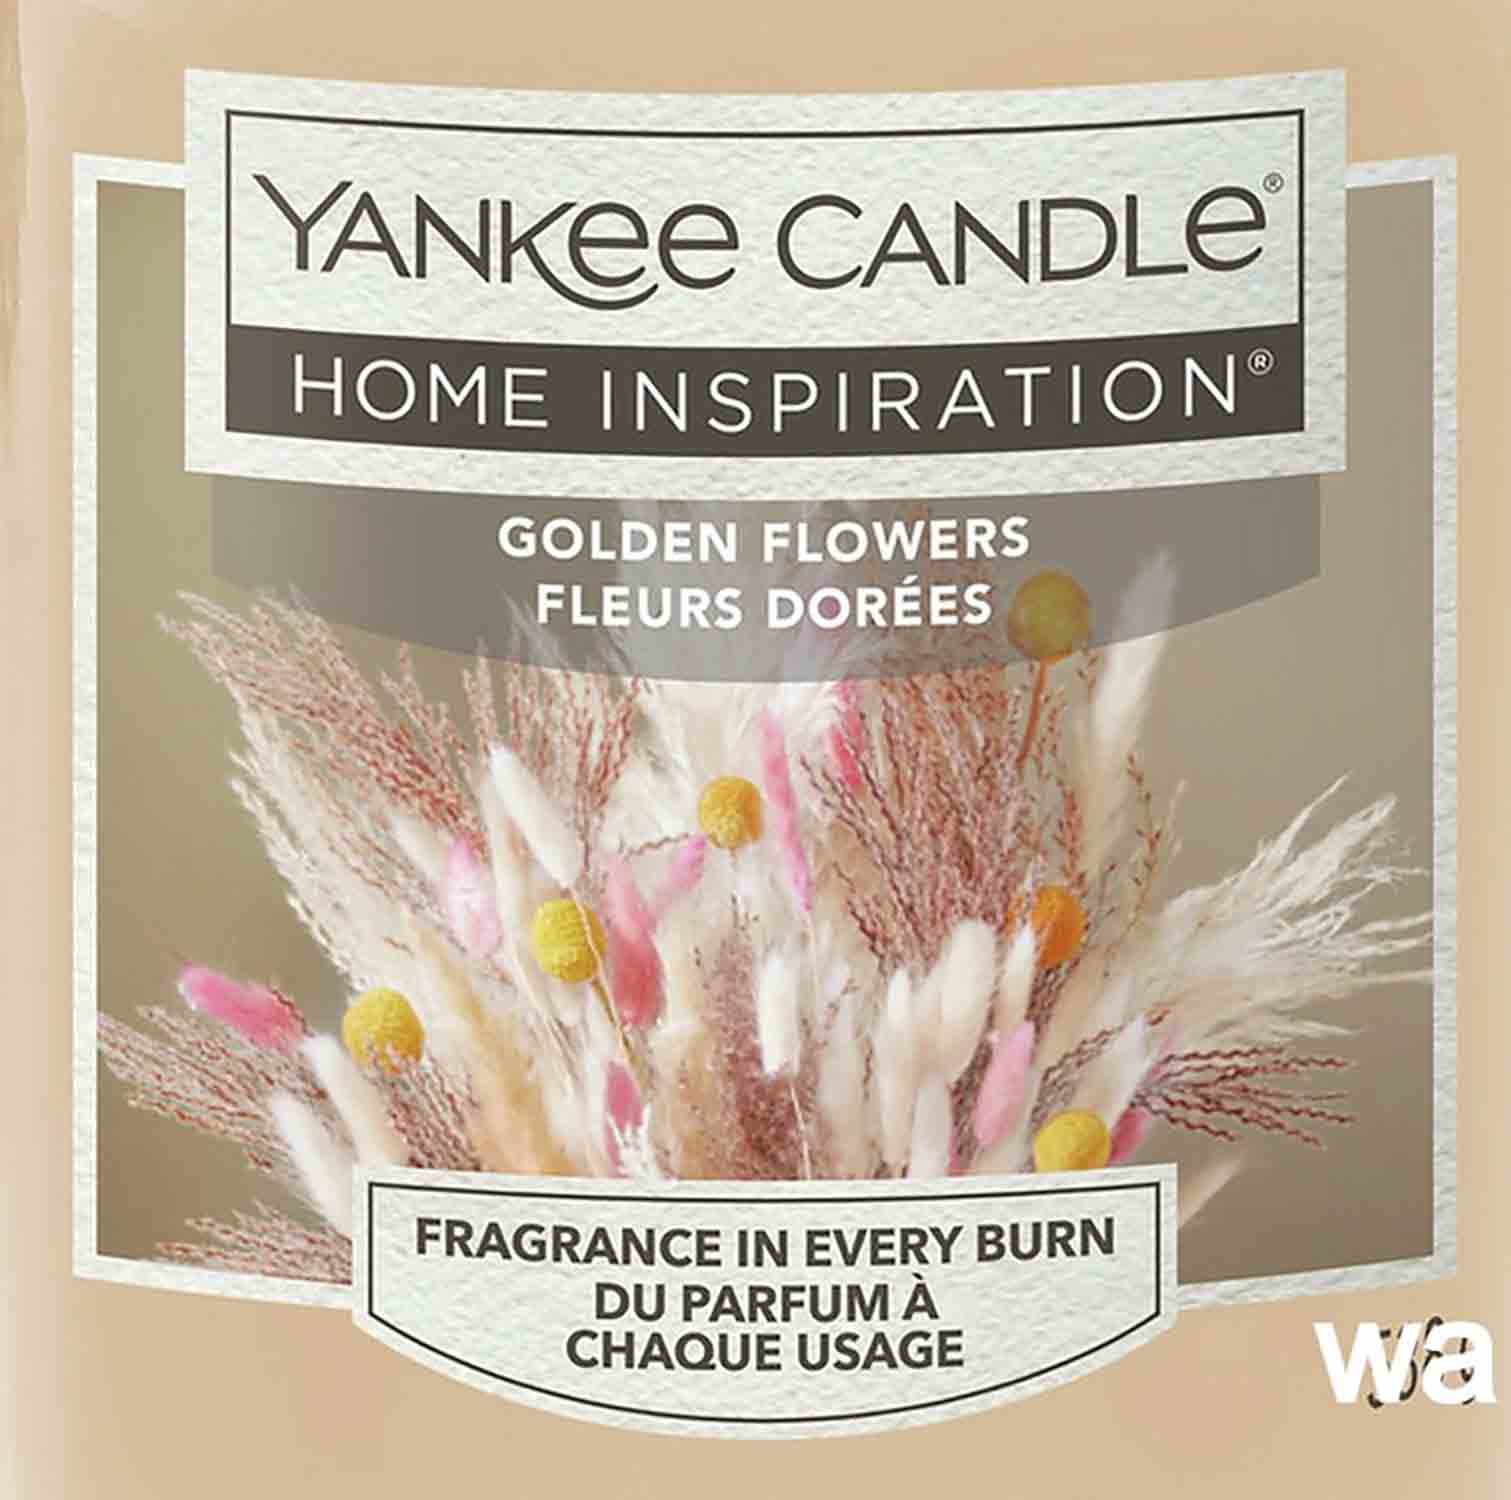 Yankee Candle Golden Flowers 22g Crumble vosk